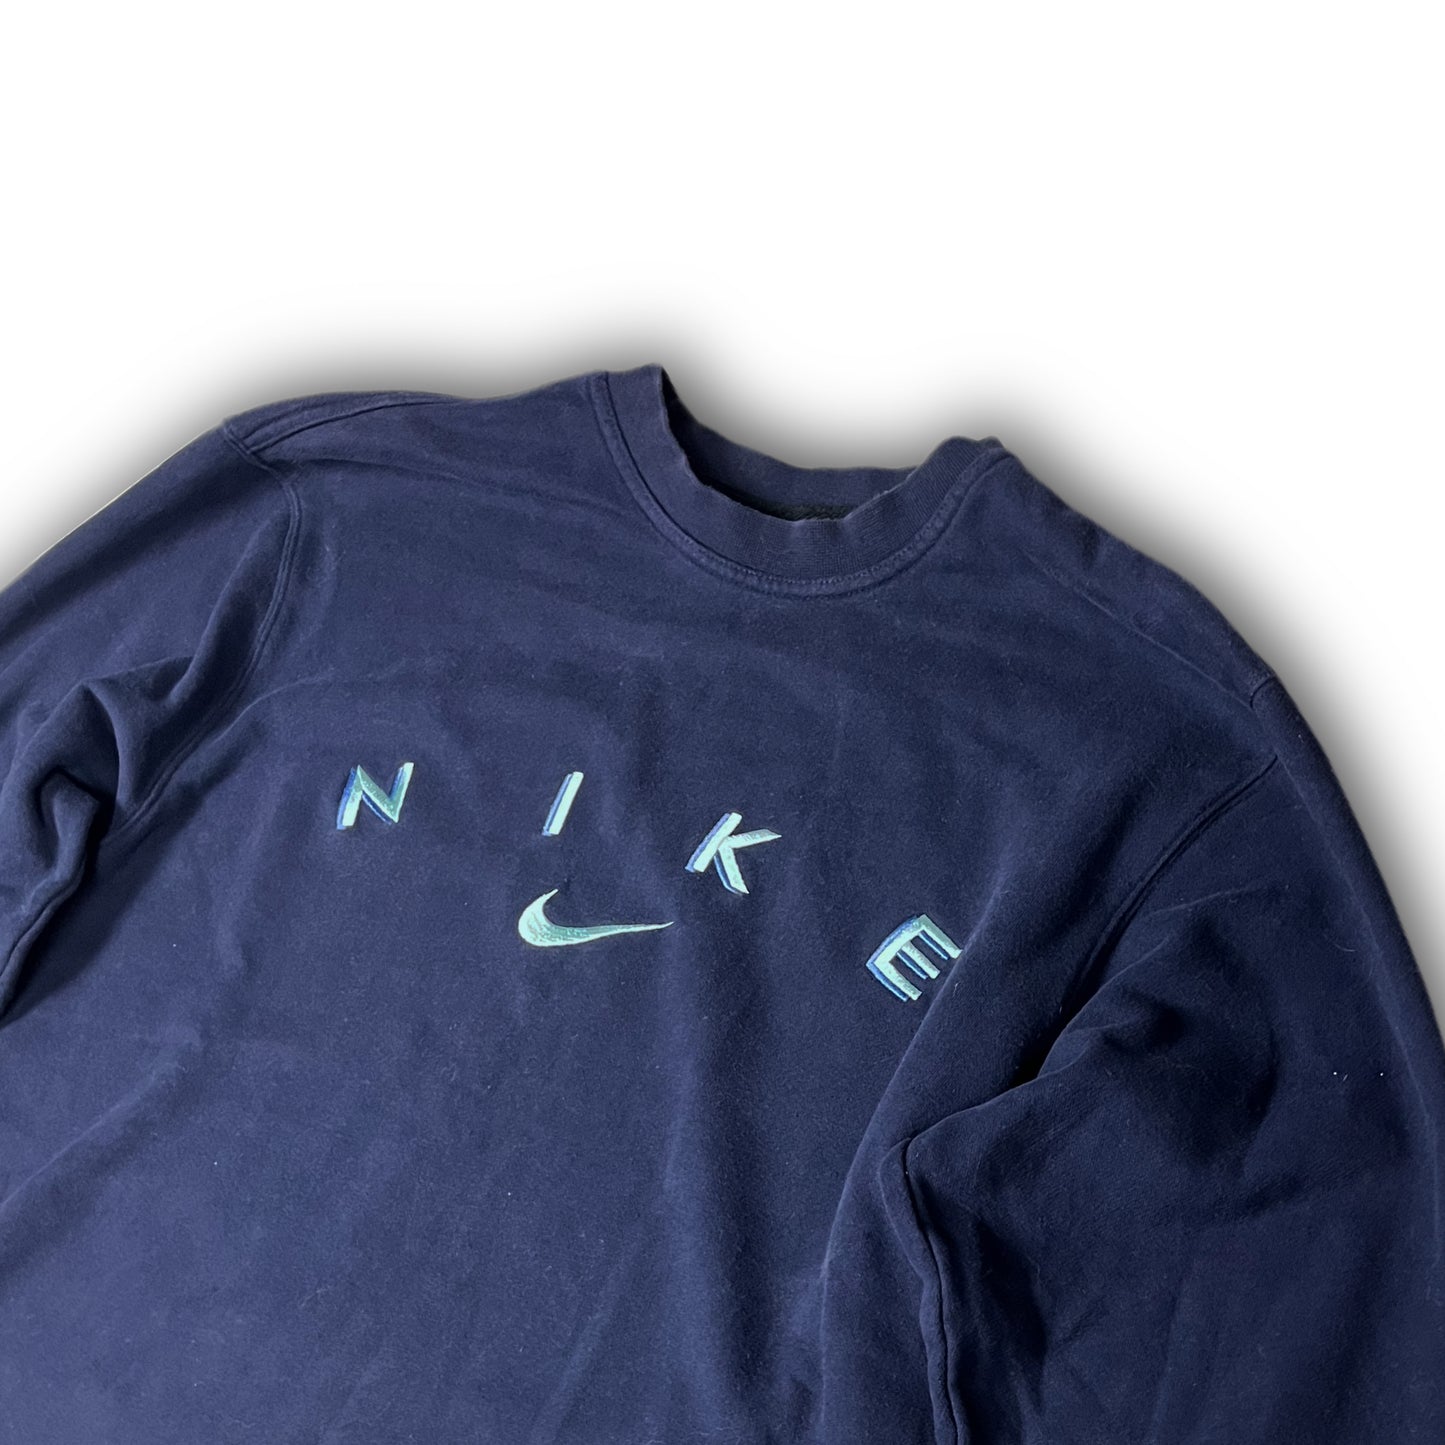 Nike Vintage Spellout 90s Sweater Iconic